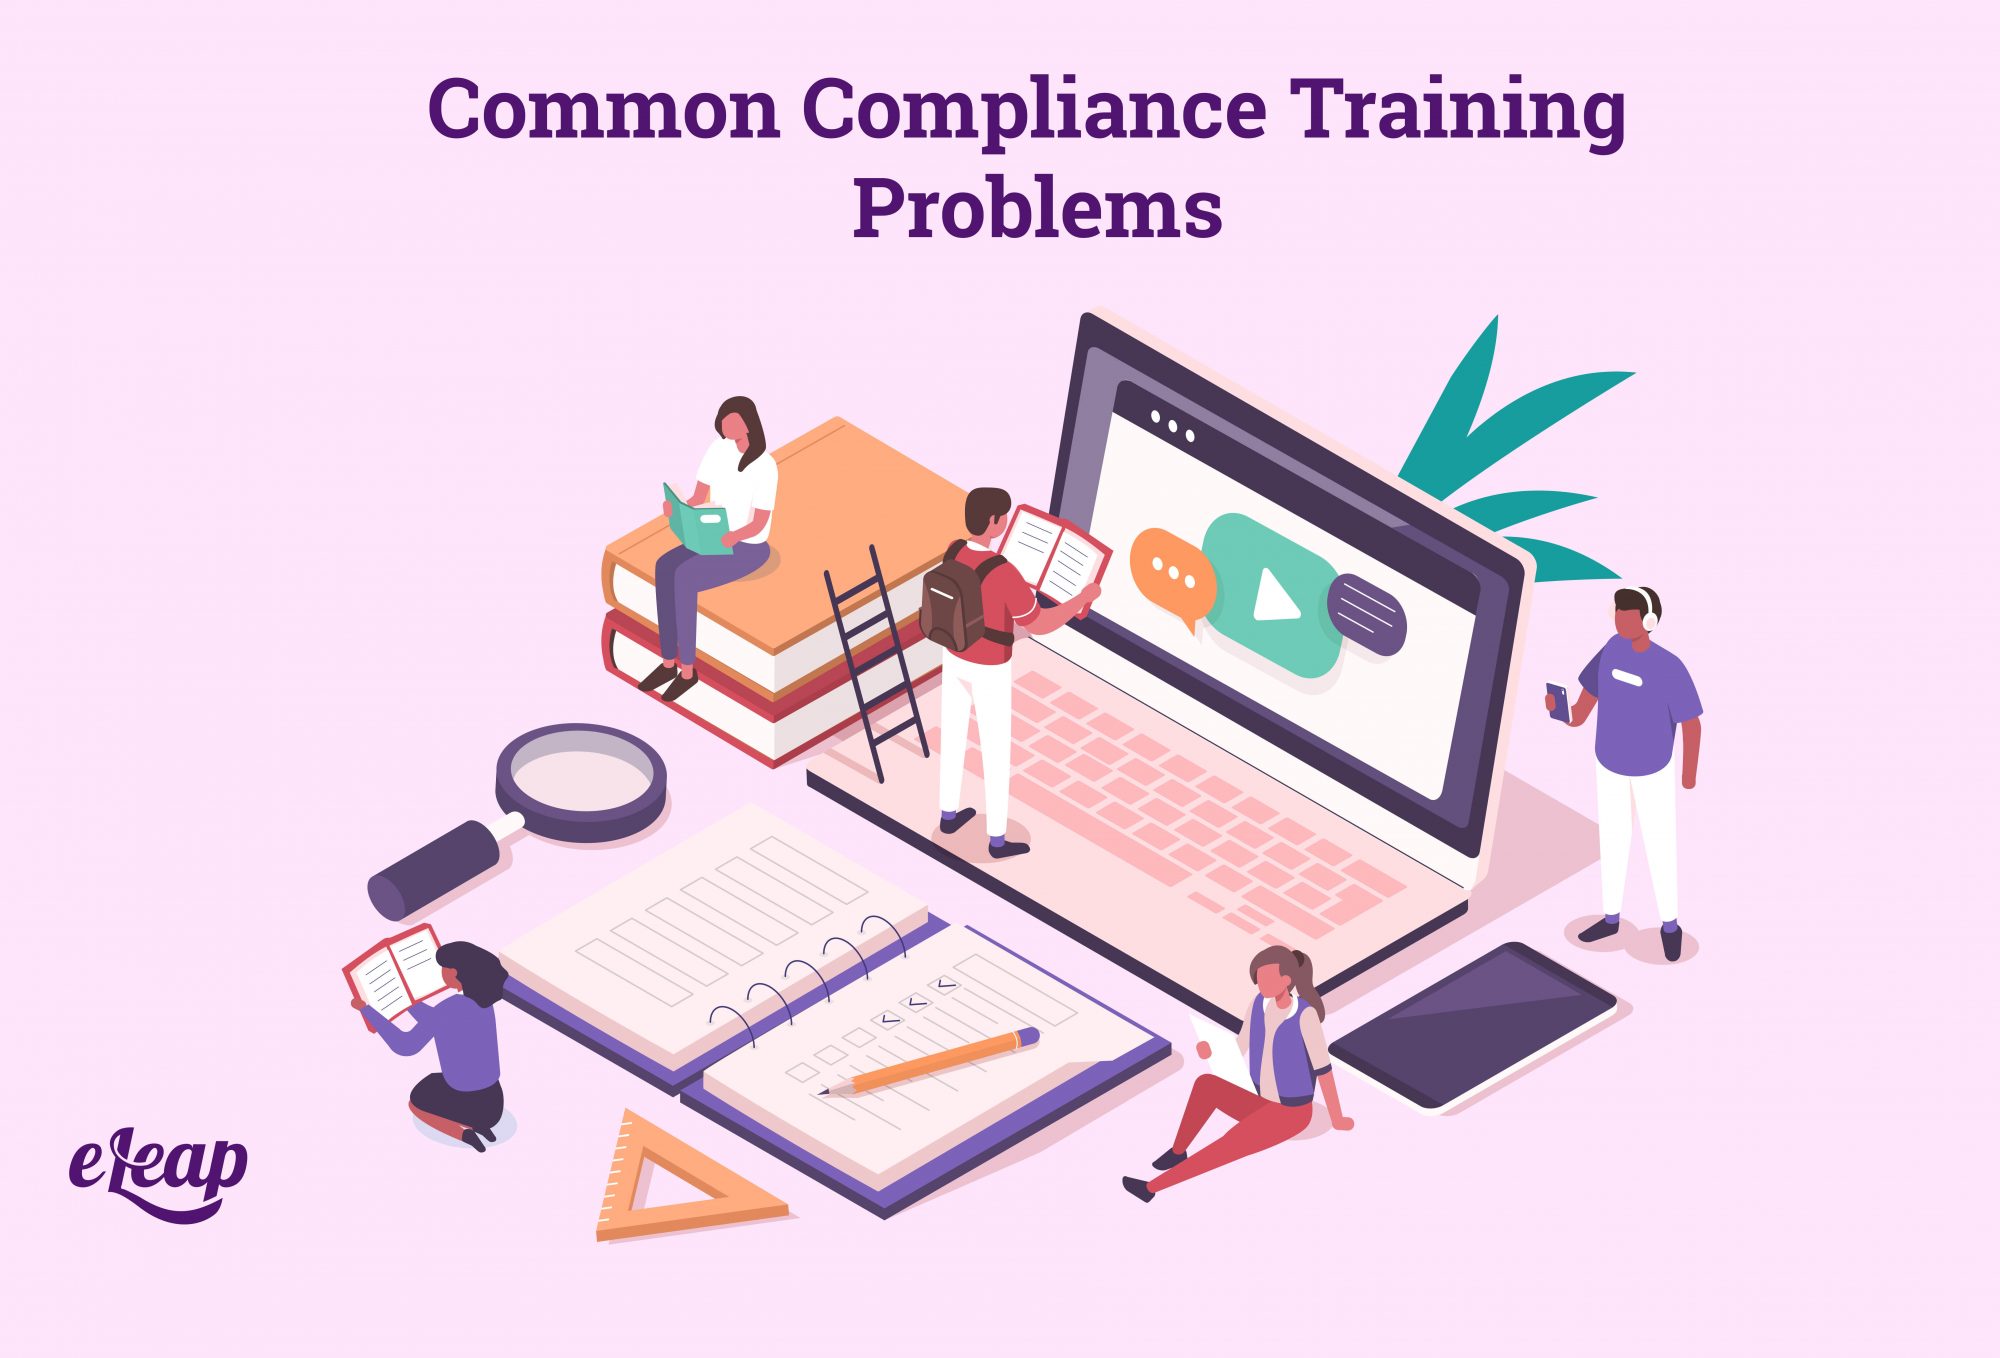 Common Compliance Training Problems